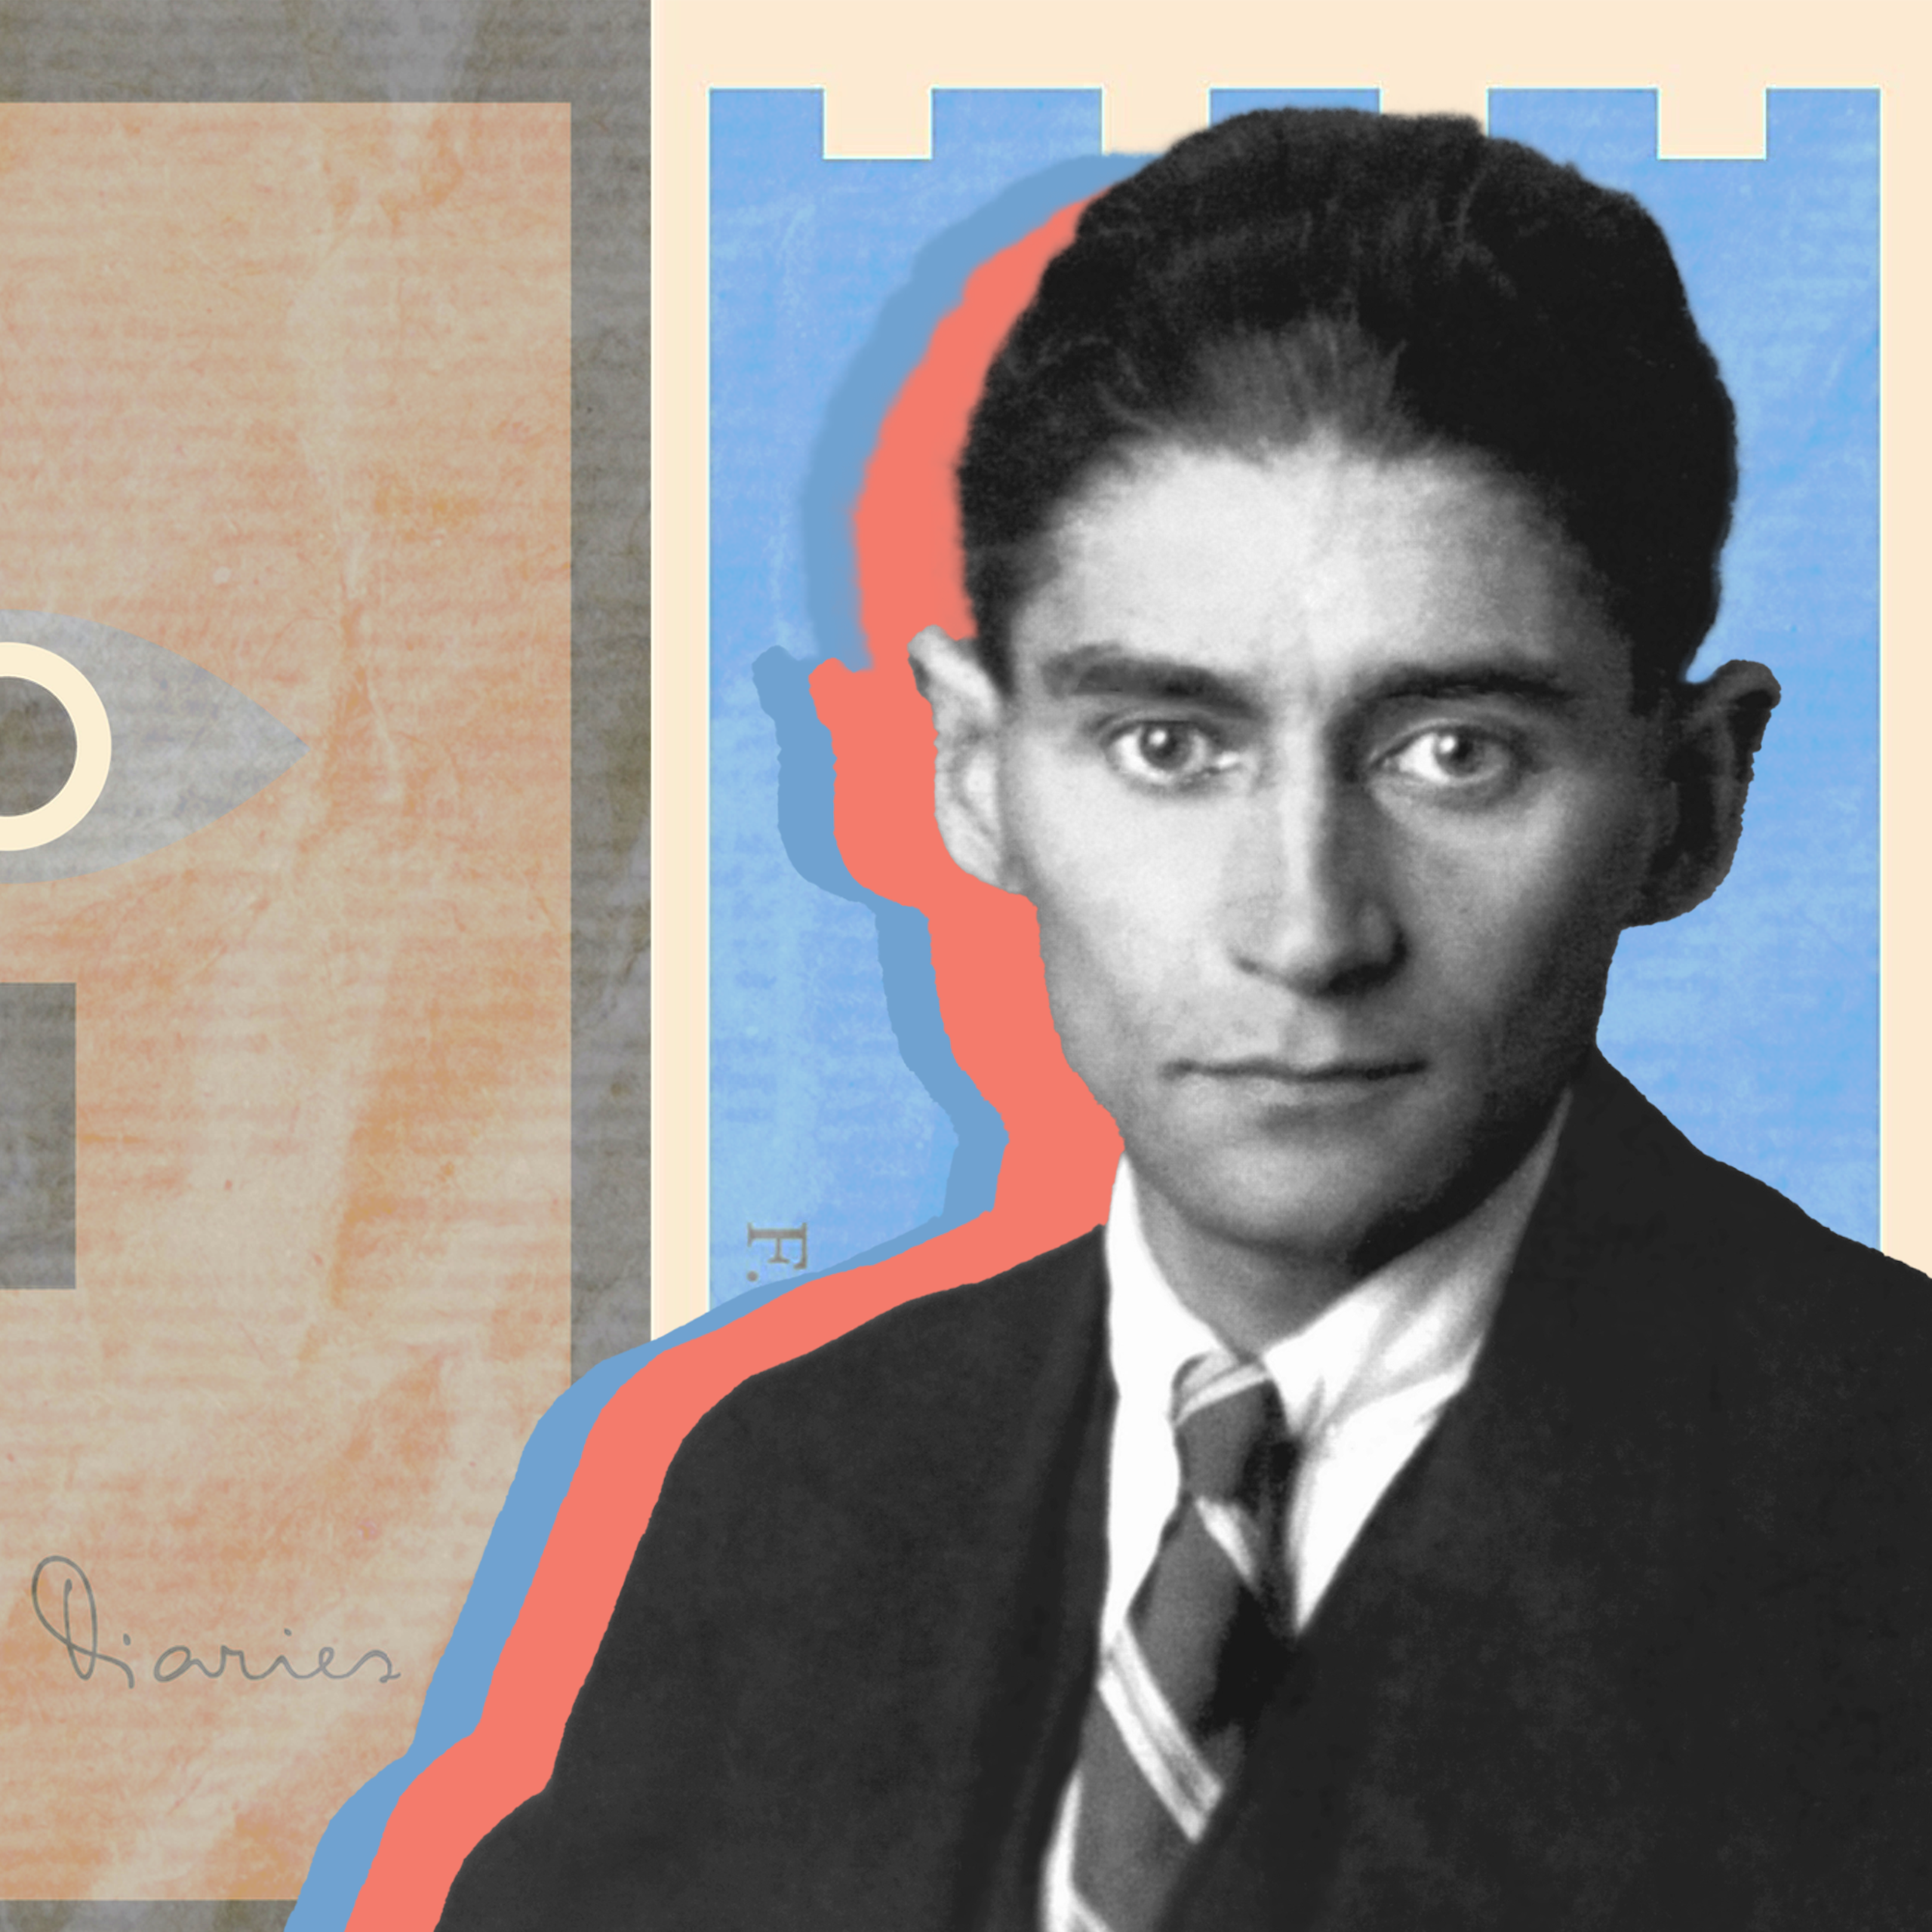 Friday essay: ‘All I am is literature’ – Franz Kafka’s diaries were the forge of his writing